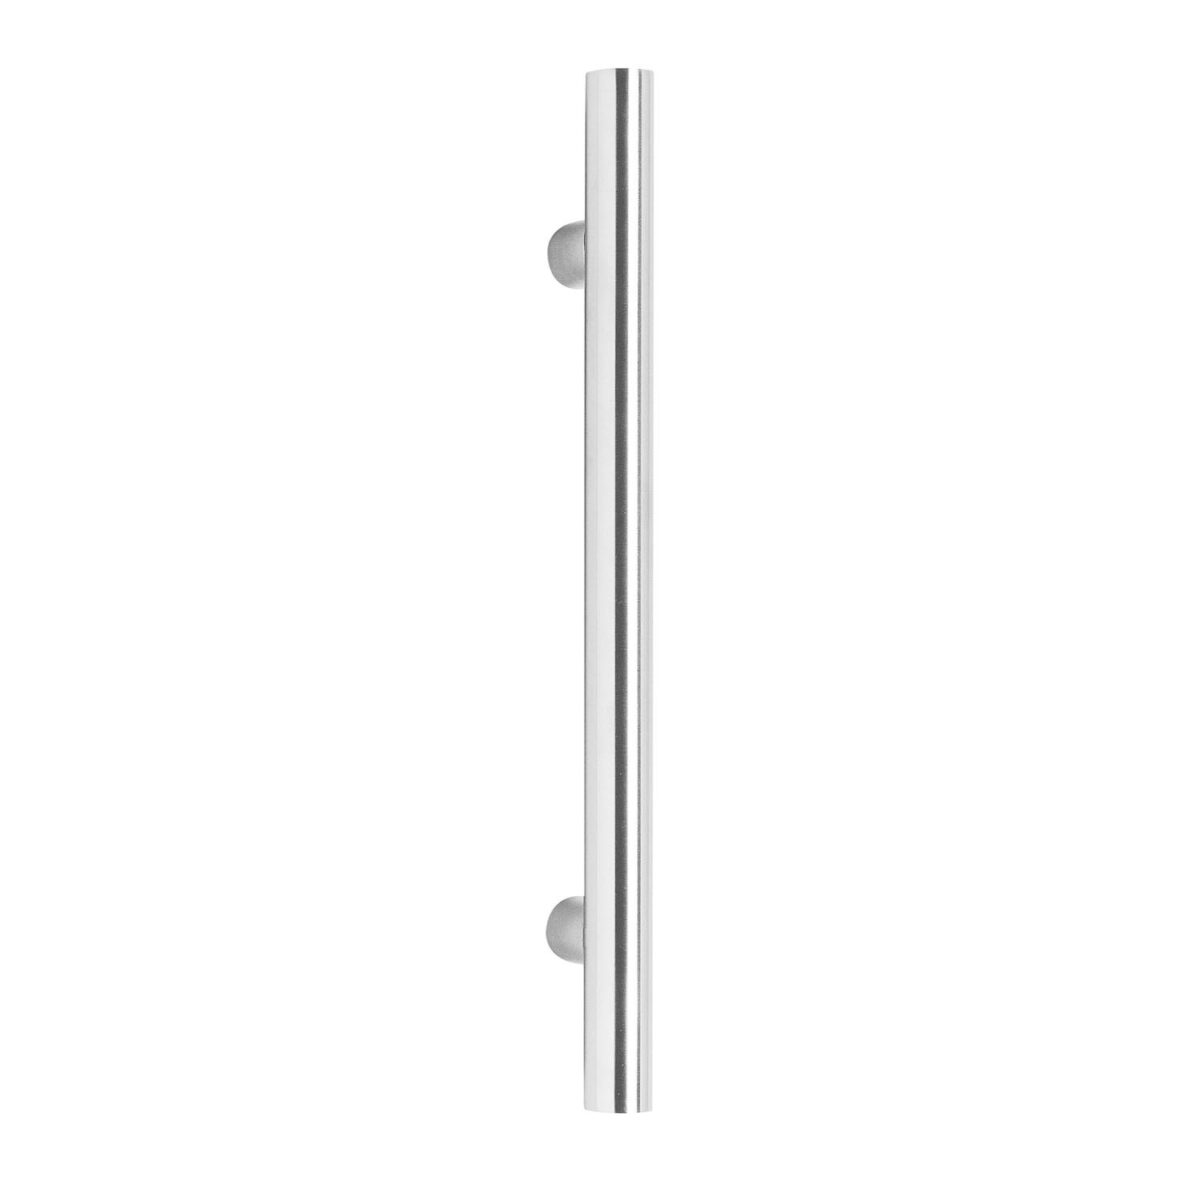 Intersteel door handle 300, Intersteel Door handle 300 mm T shape brushed stainless steel